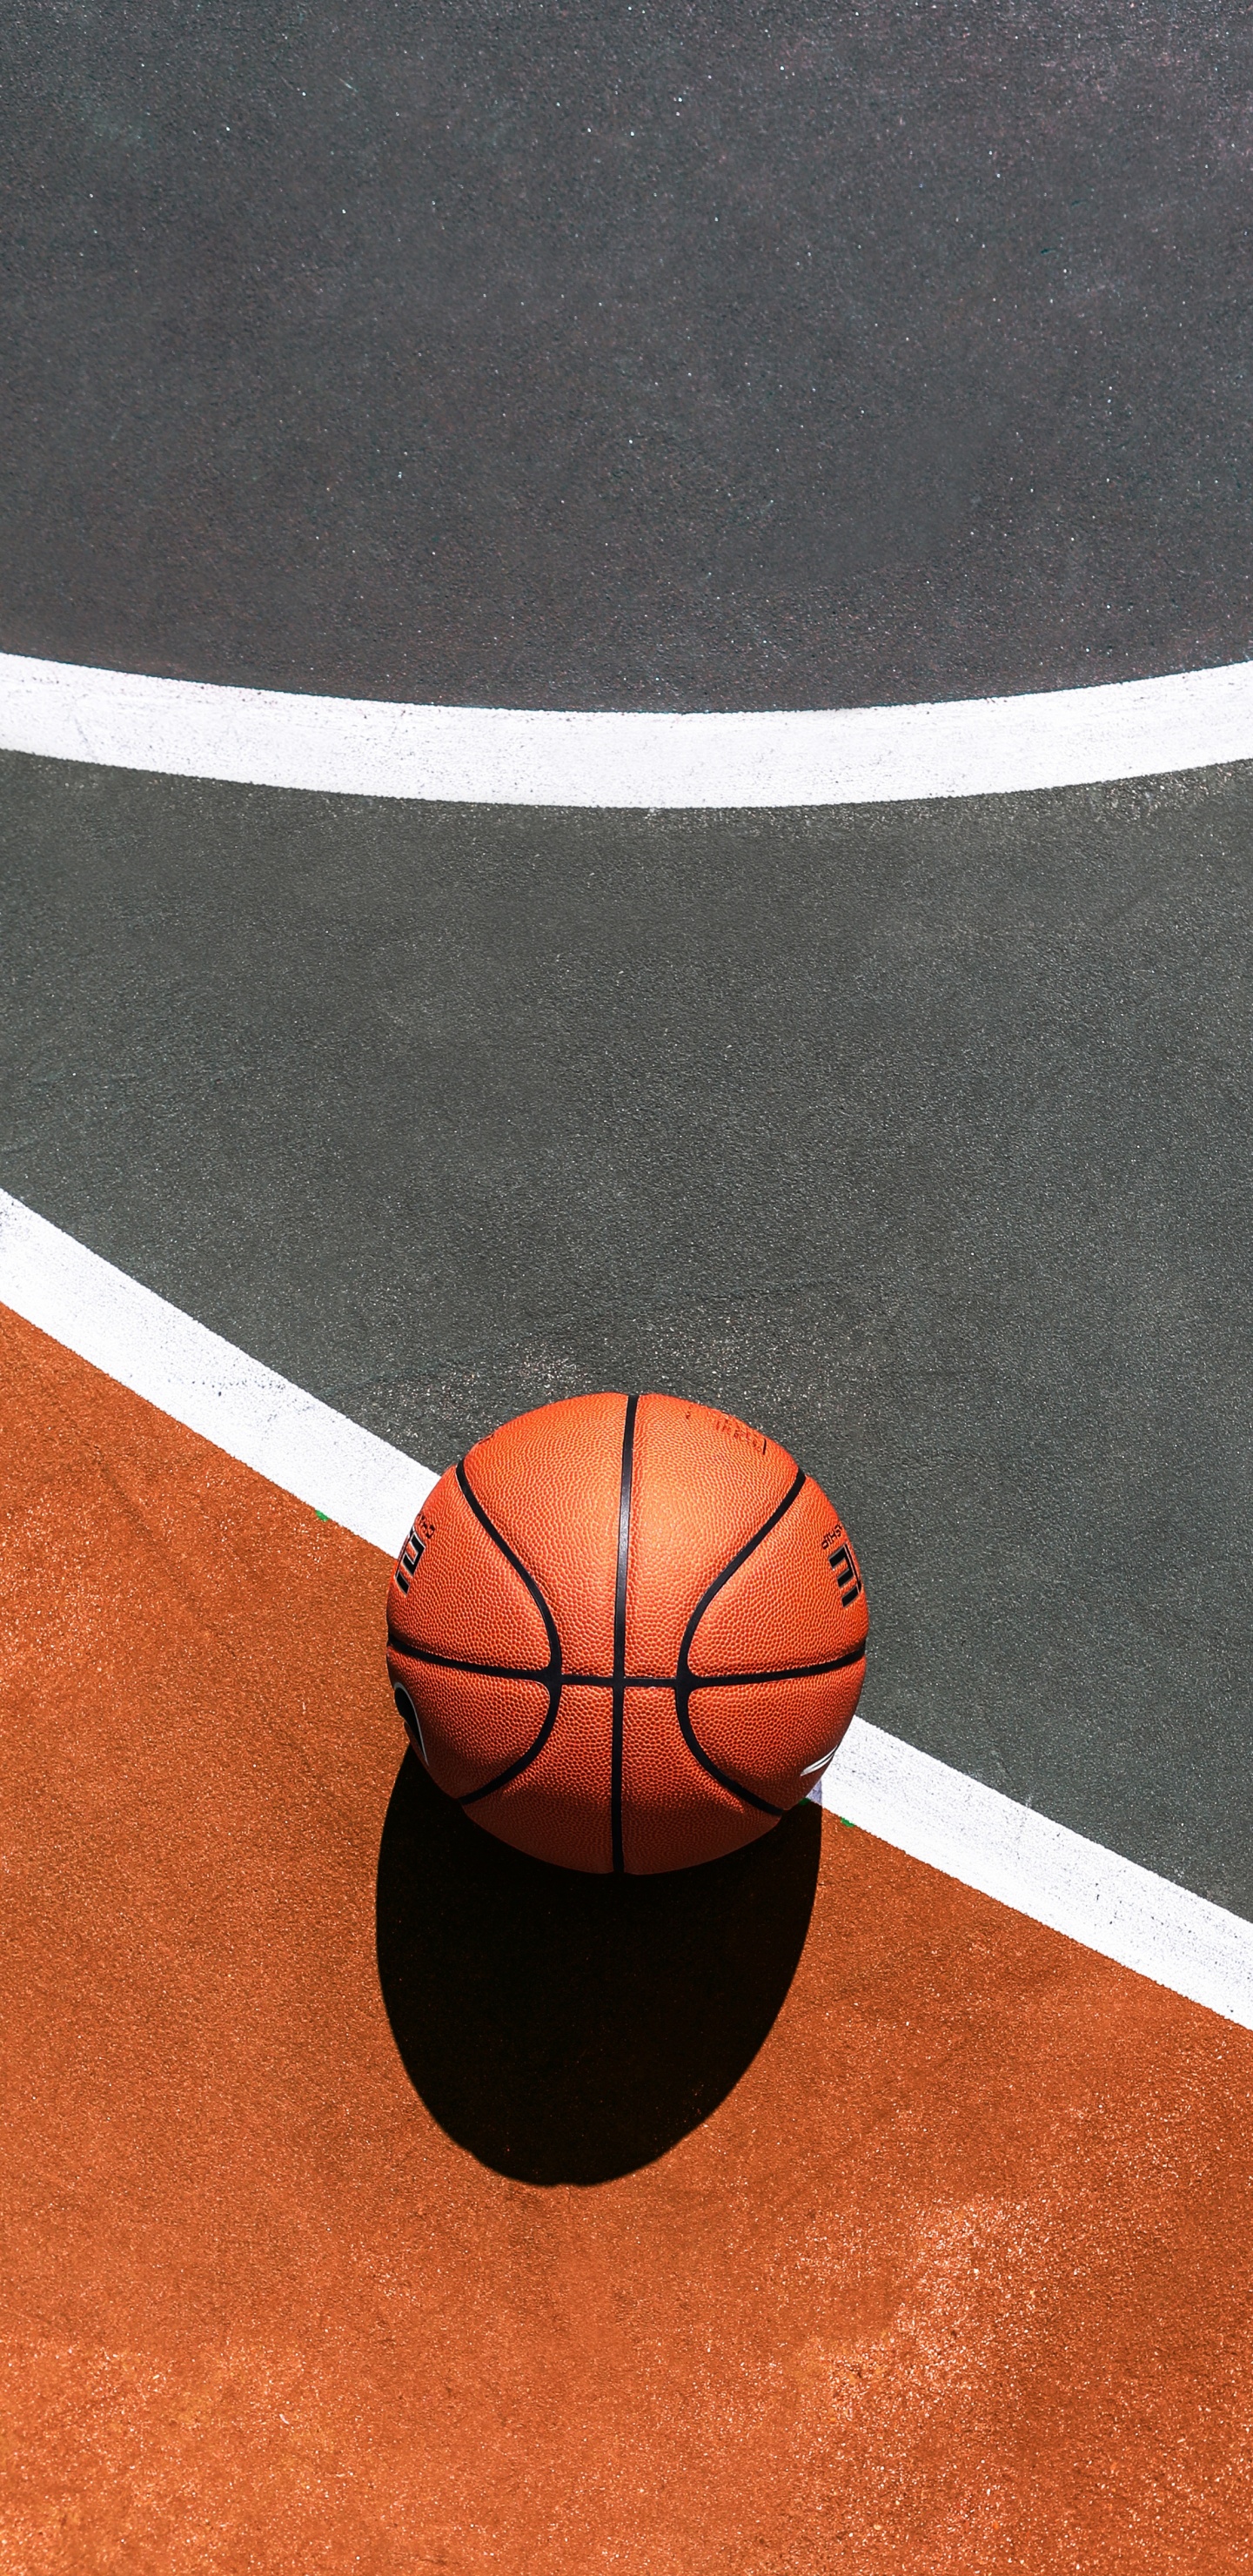 Basketball on Blue and White Basketball Court. Wallpaper in 1440x2960 Resolution